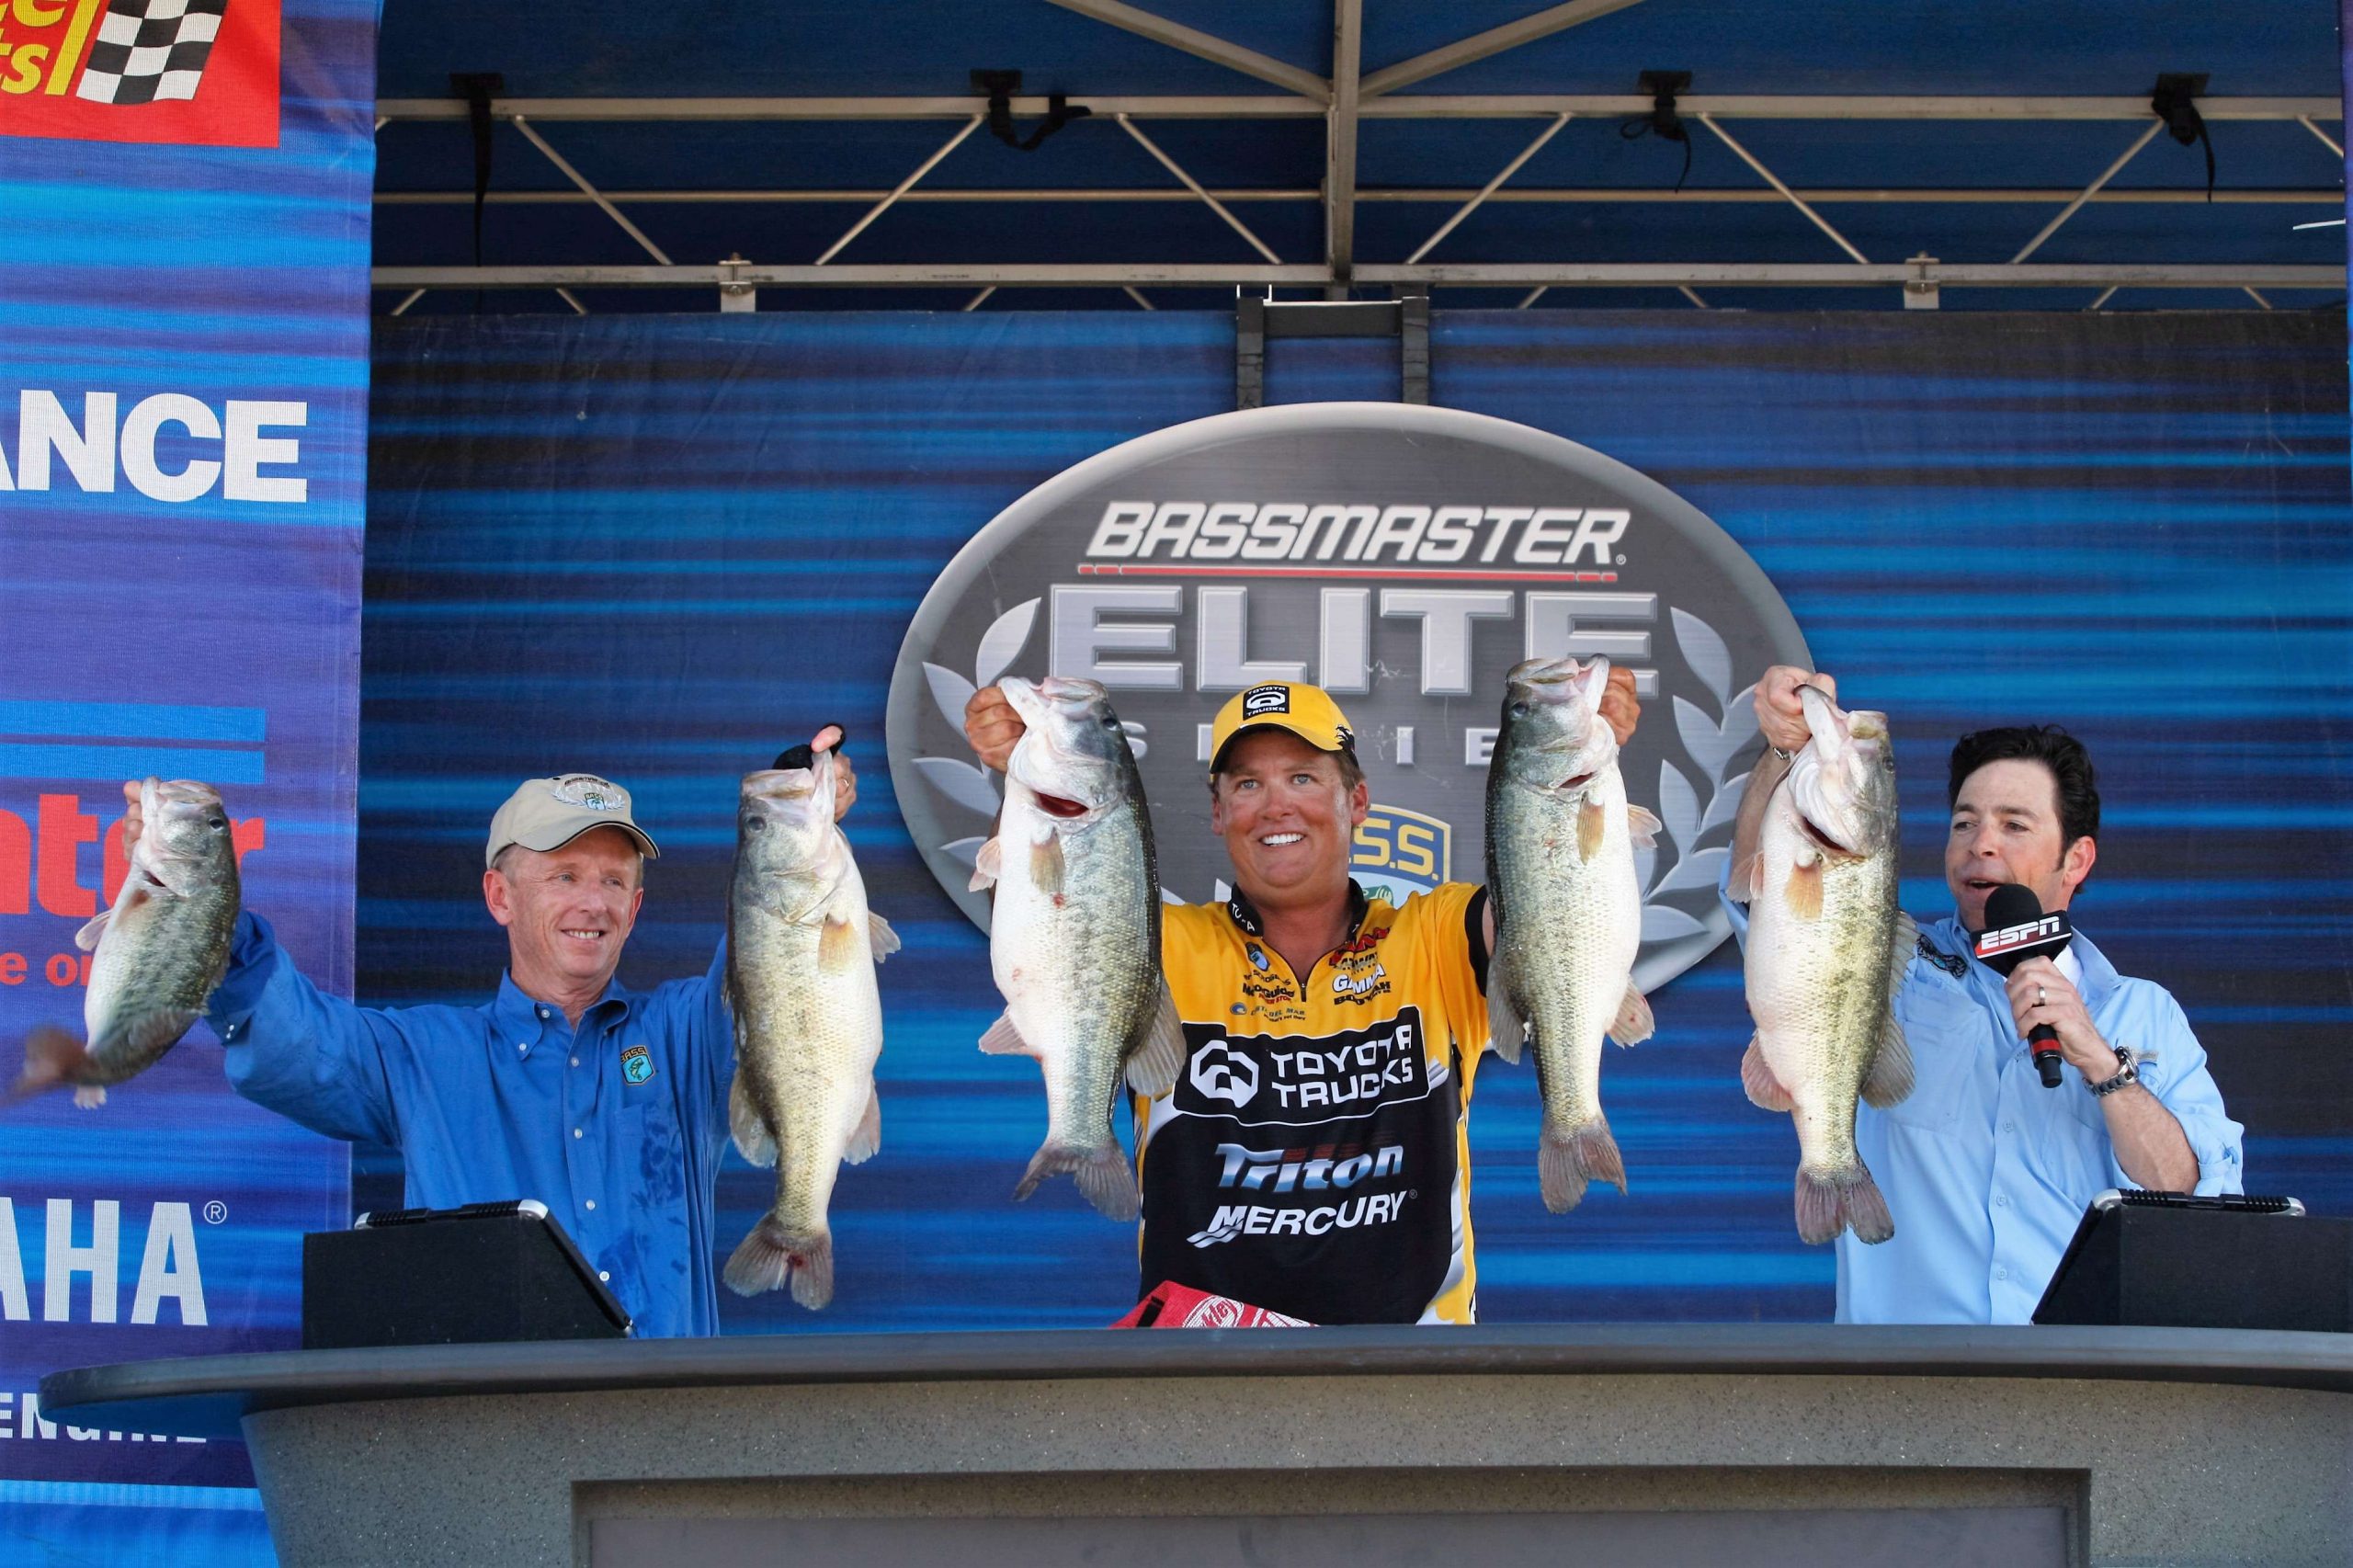   While Elias jumped over four anglers to win, Terry Scroggins made a bigger climb as he started Day 4 in 12th place and ended as runner-up. He caught 44-4, which stands second only to Dean Rojasâ 45-2 on Lake Toho in 2001 as the heaviest single day catch in B.A.S.S. history. Scroggins said he lost a 10- to 11-pounder in the final minutes that would have shattered Rojasâ mark.